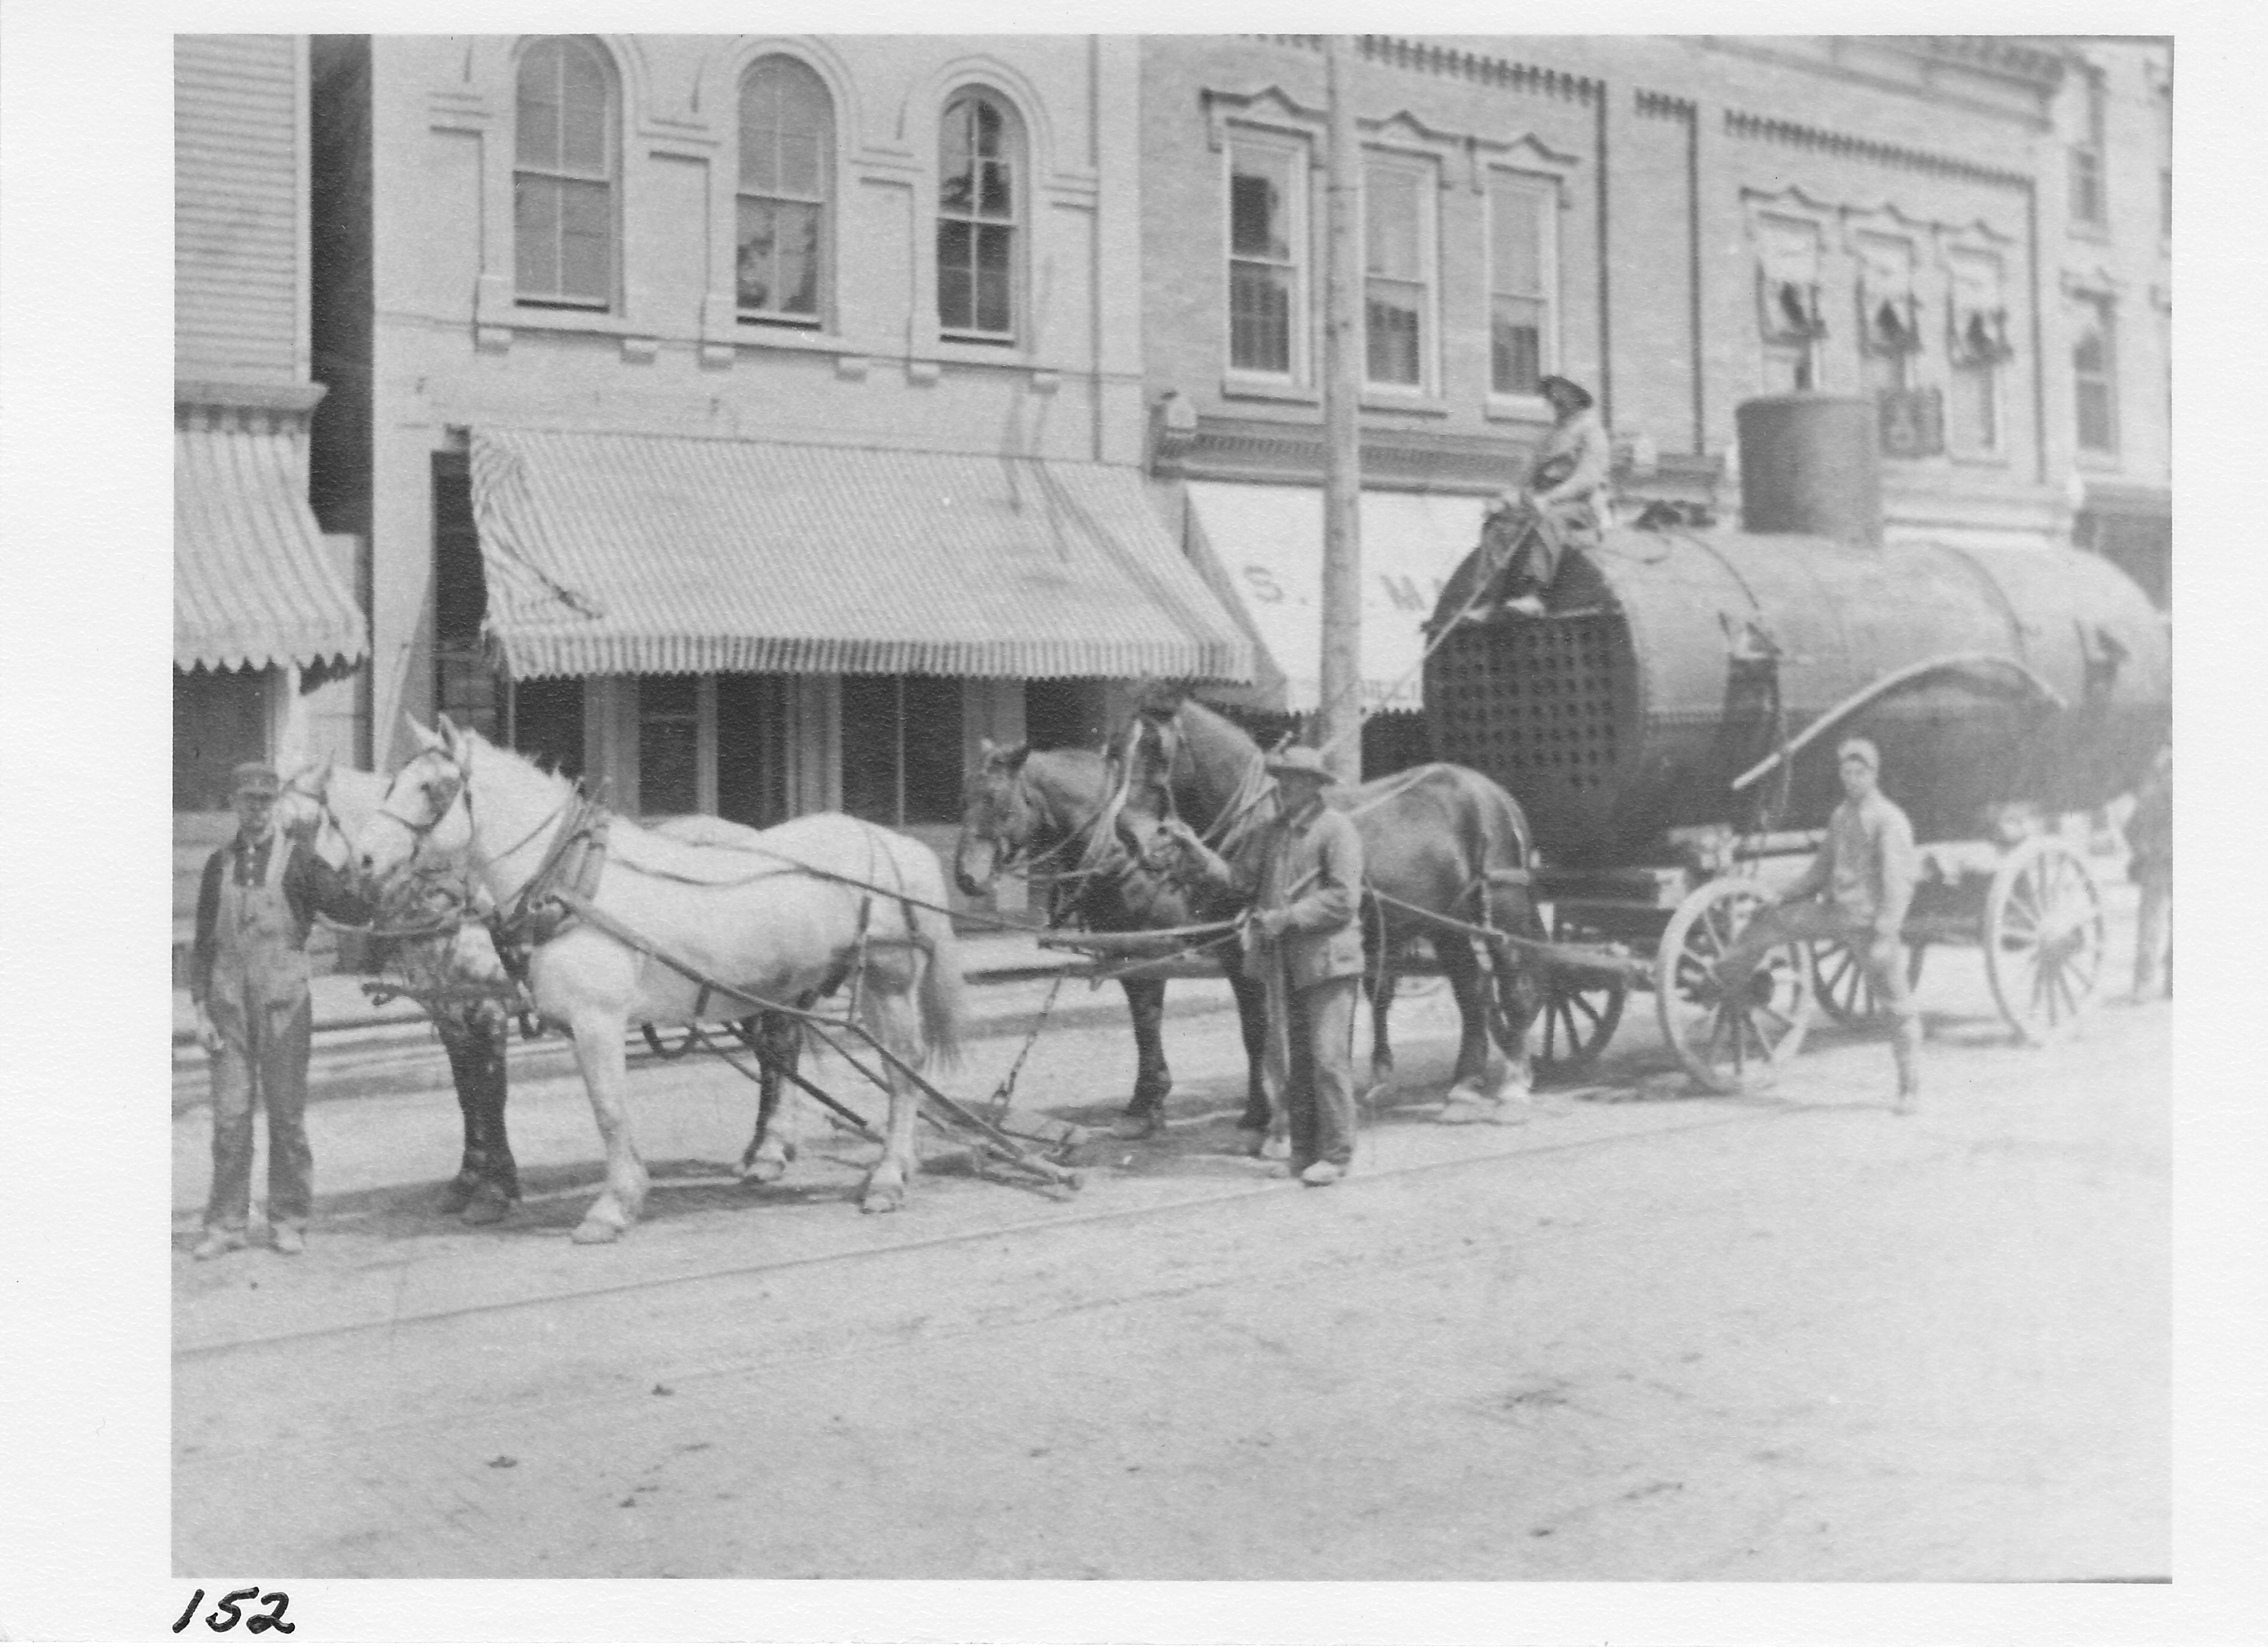 Photo in 1901 of Porter Cartage Service moving steel boiler for new Brick & Tile Co. (Herb Sims and Ed Clark).  Site was in the rear of the M & S building site on Salisbury Street.  (l-r) Elmer Porter, Jonas Henry, Charles Bauman, Olef Heckman, Bert Skates.